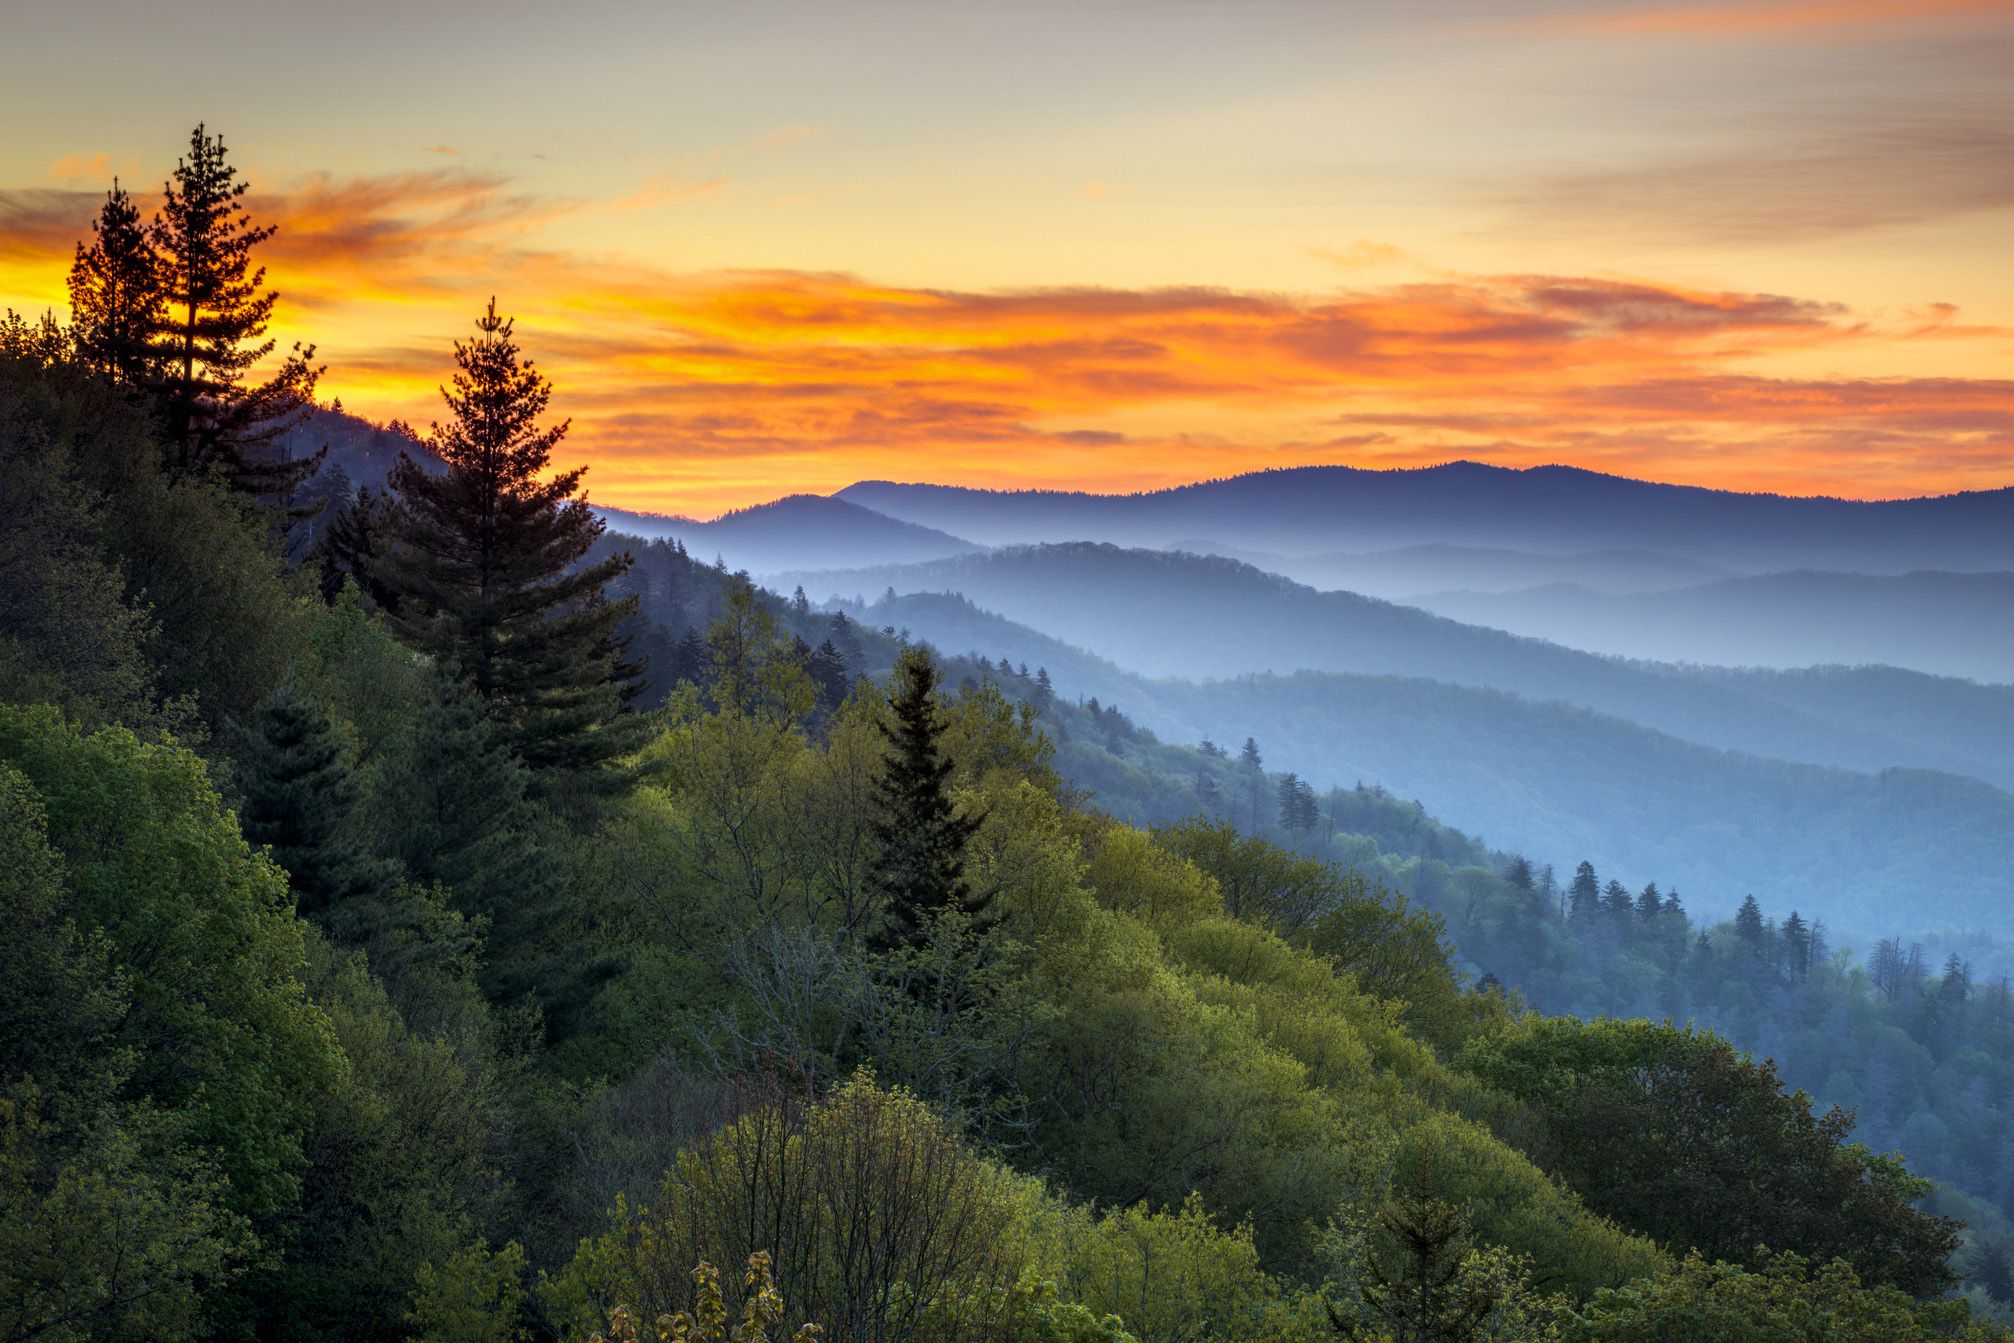 <p>Famous for its picturesque expanses of forest, as well as its diverse plant and animal life, <a href="https://www.nps.gov/grsm/index.htm">Great Smoky Mountains National Park</a> protects an ancient mountain range and is the most visited national park in the country.</p>  <p><strong>Related:</strong> <a href="https://blog.cheapism.com/least-visited-national-parks-in-america-3747/">Don't Miss 19 of America's Most Underrated National Parks</a></p>